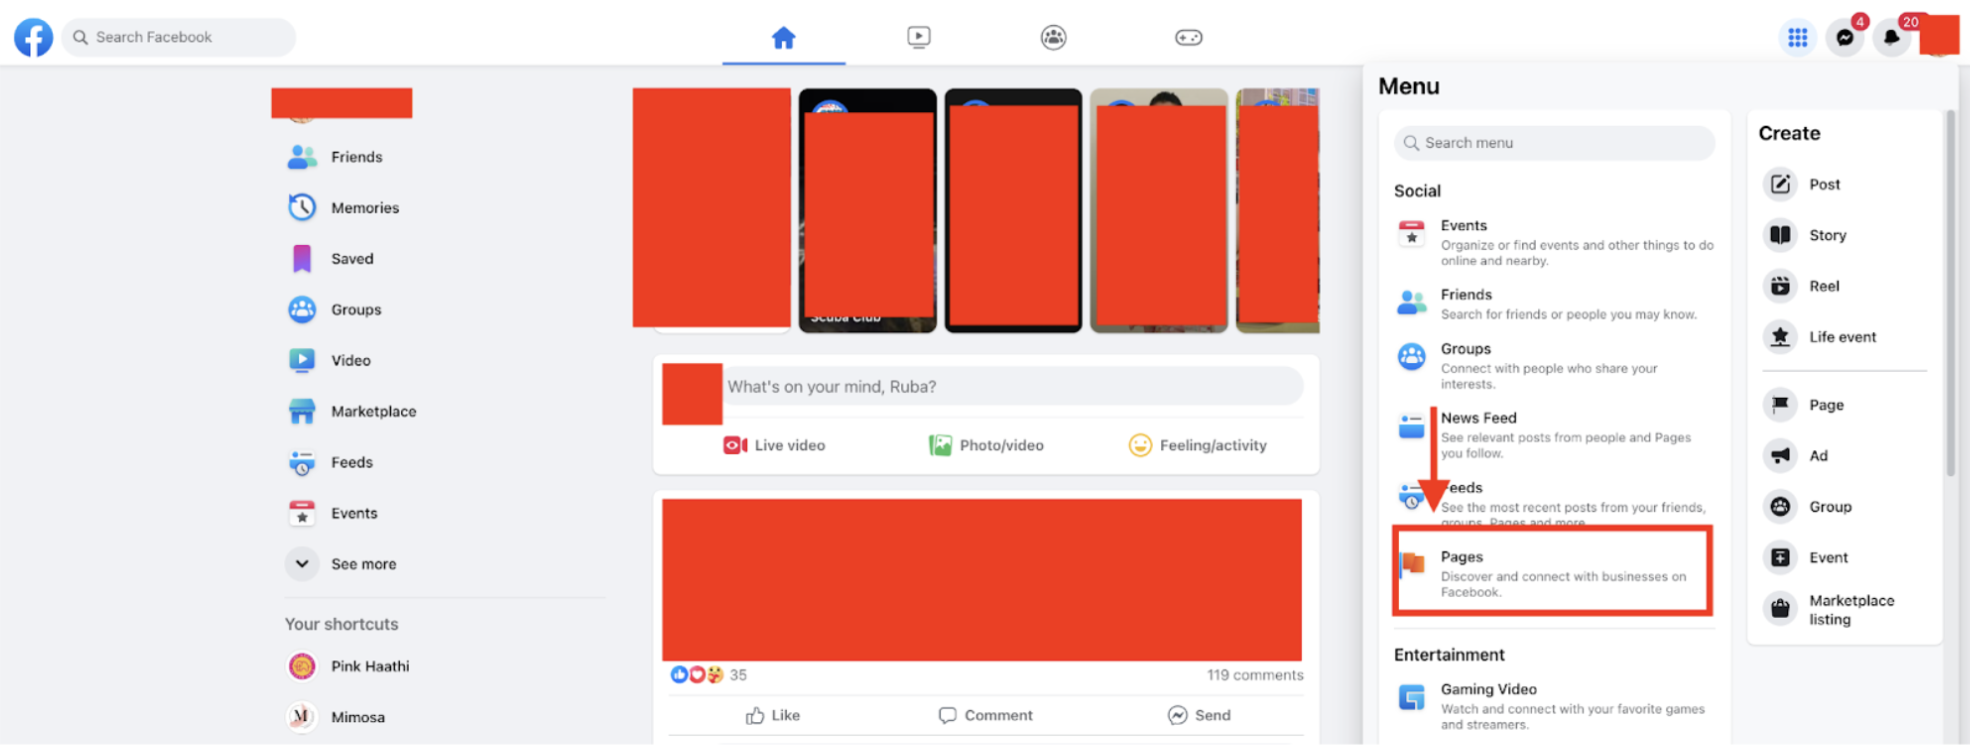 Preview of Facebook homepage. The image shows the homepage of a personal Facebook with an arrow and box highlighting where you can find the Pages tab. 